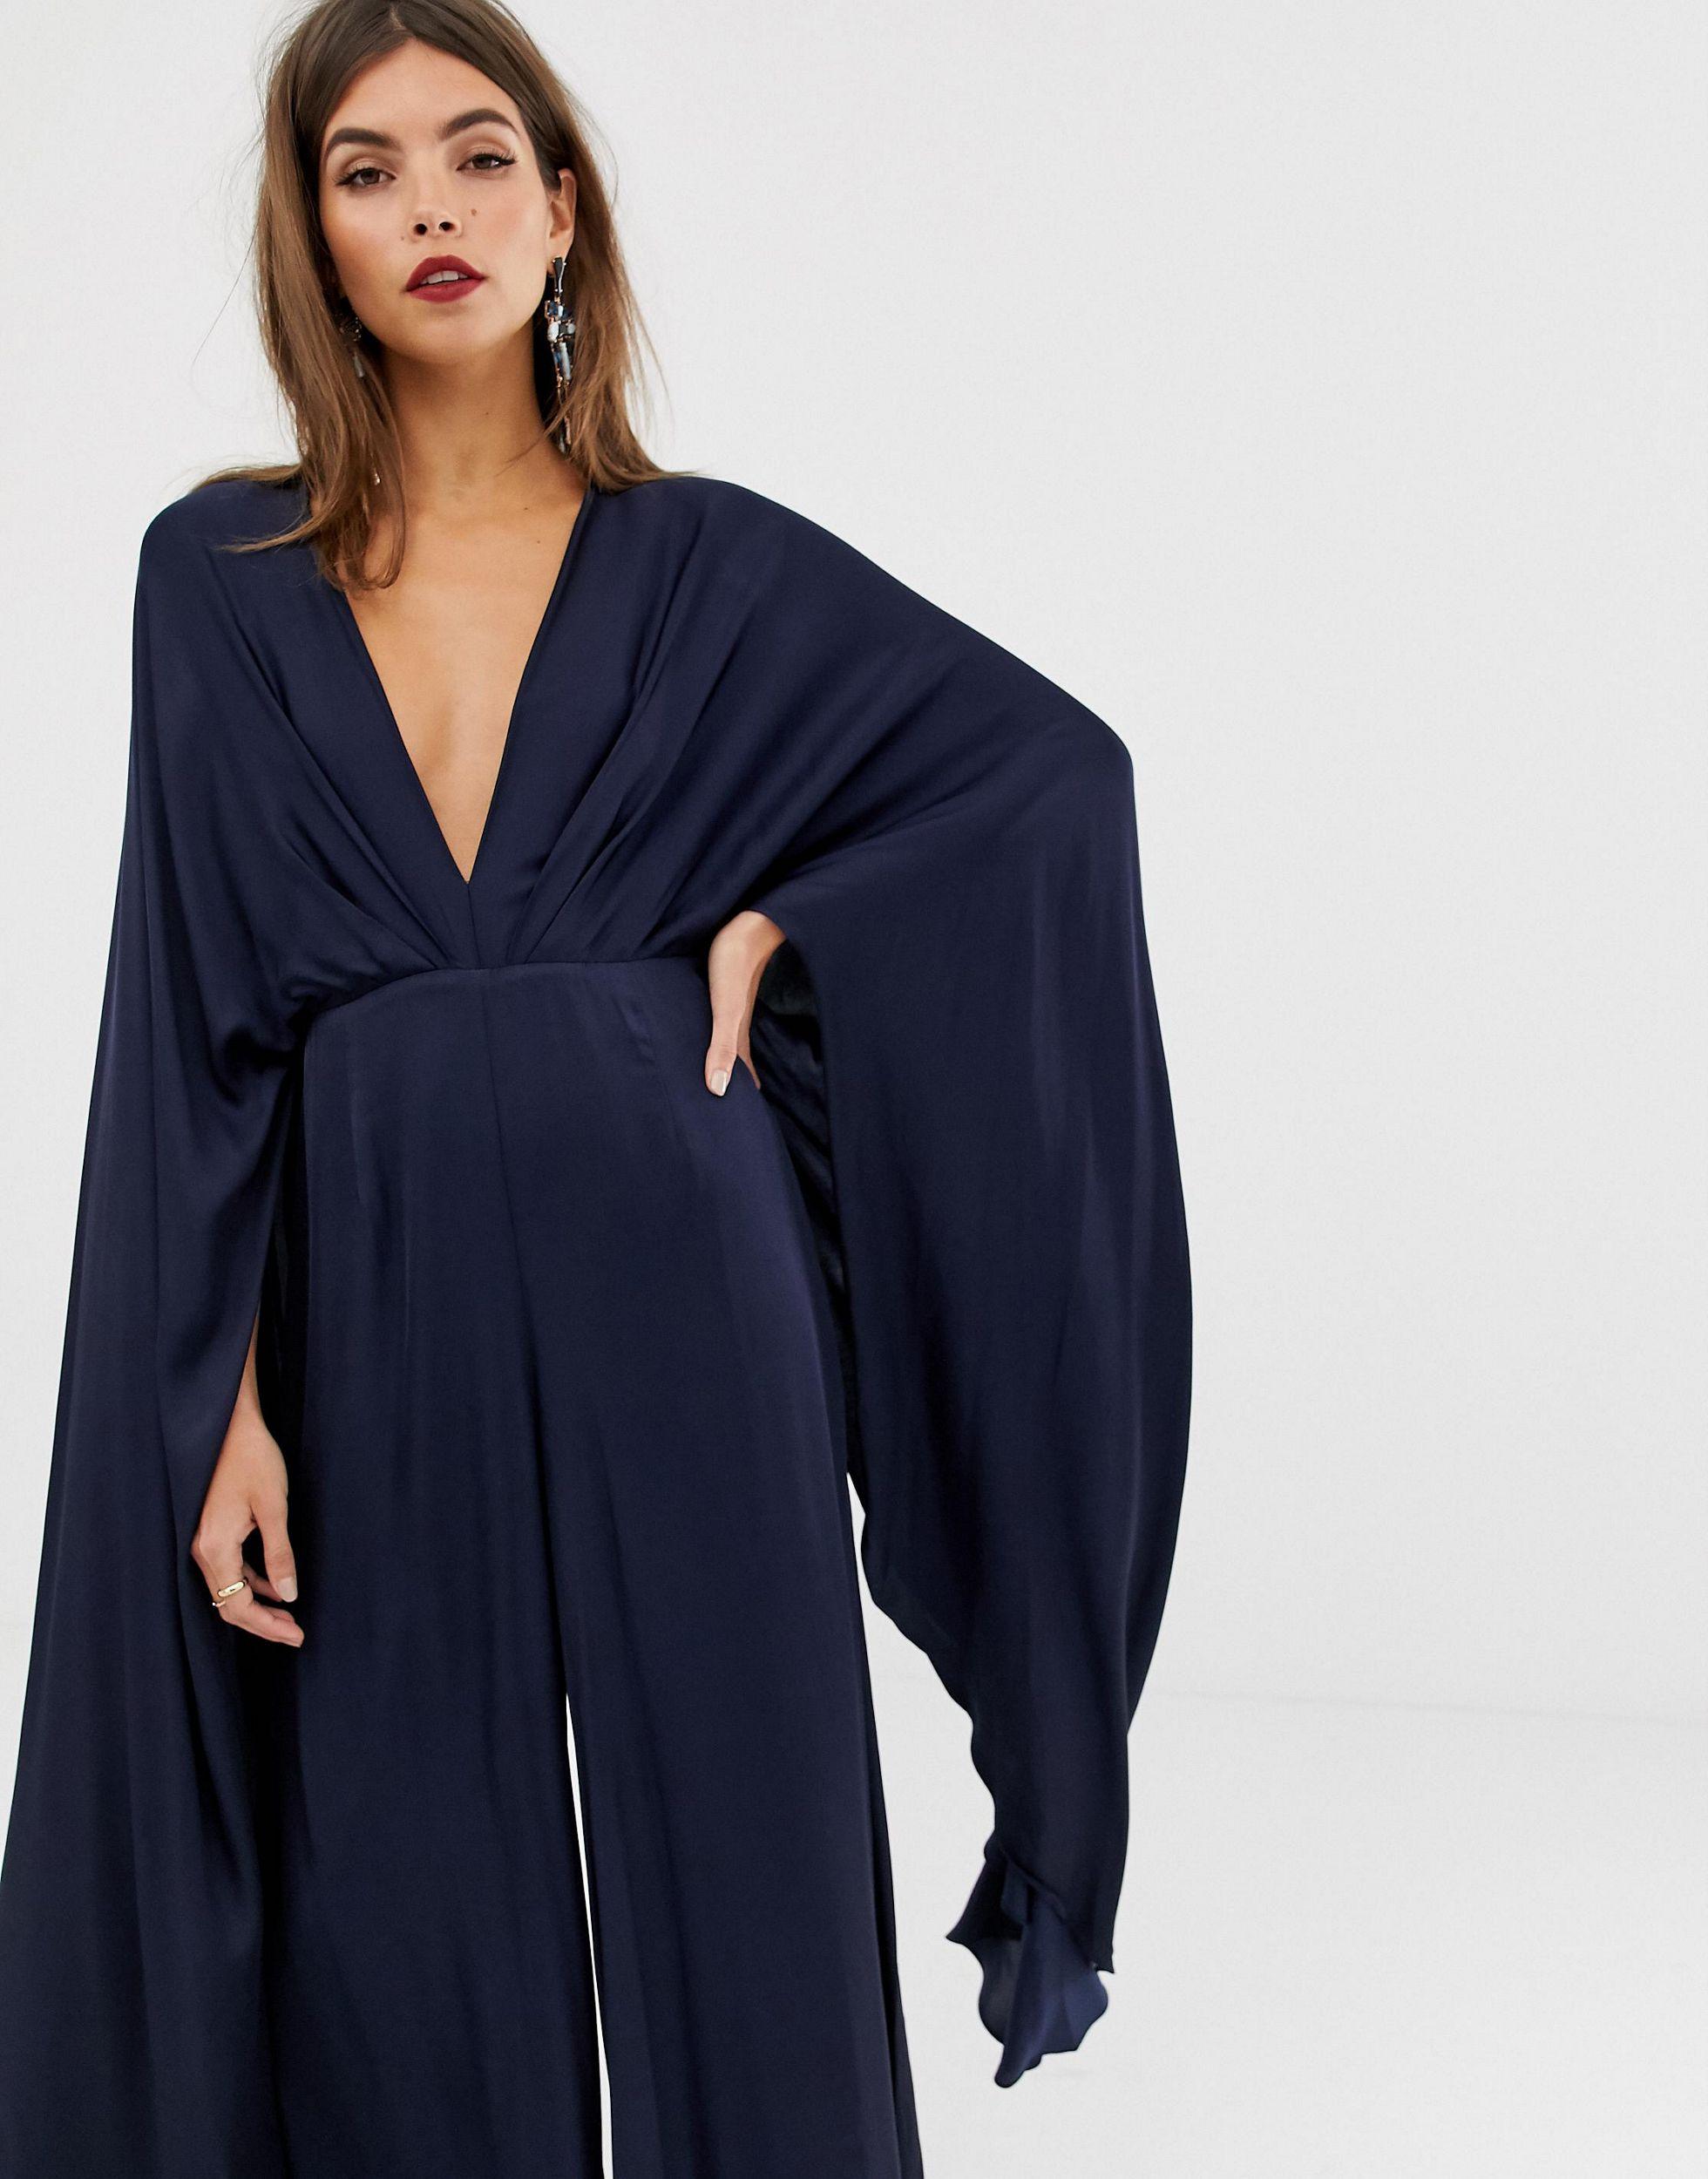 ASOS Satin Cape Sleeve Jumpsuit in Navy (Blue) - Lyst